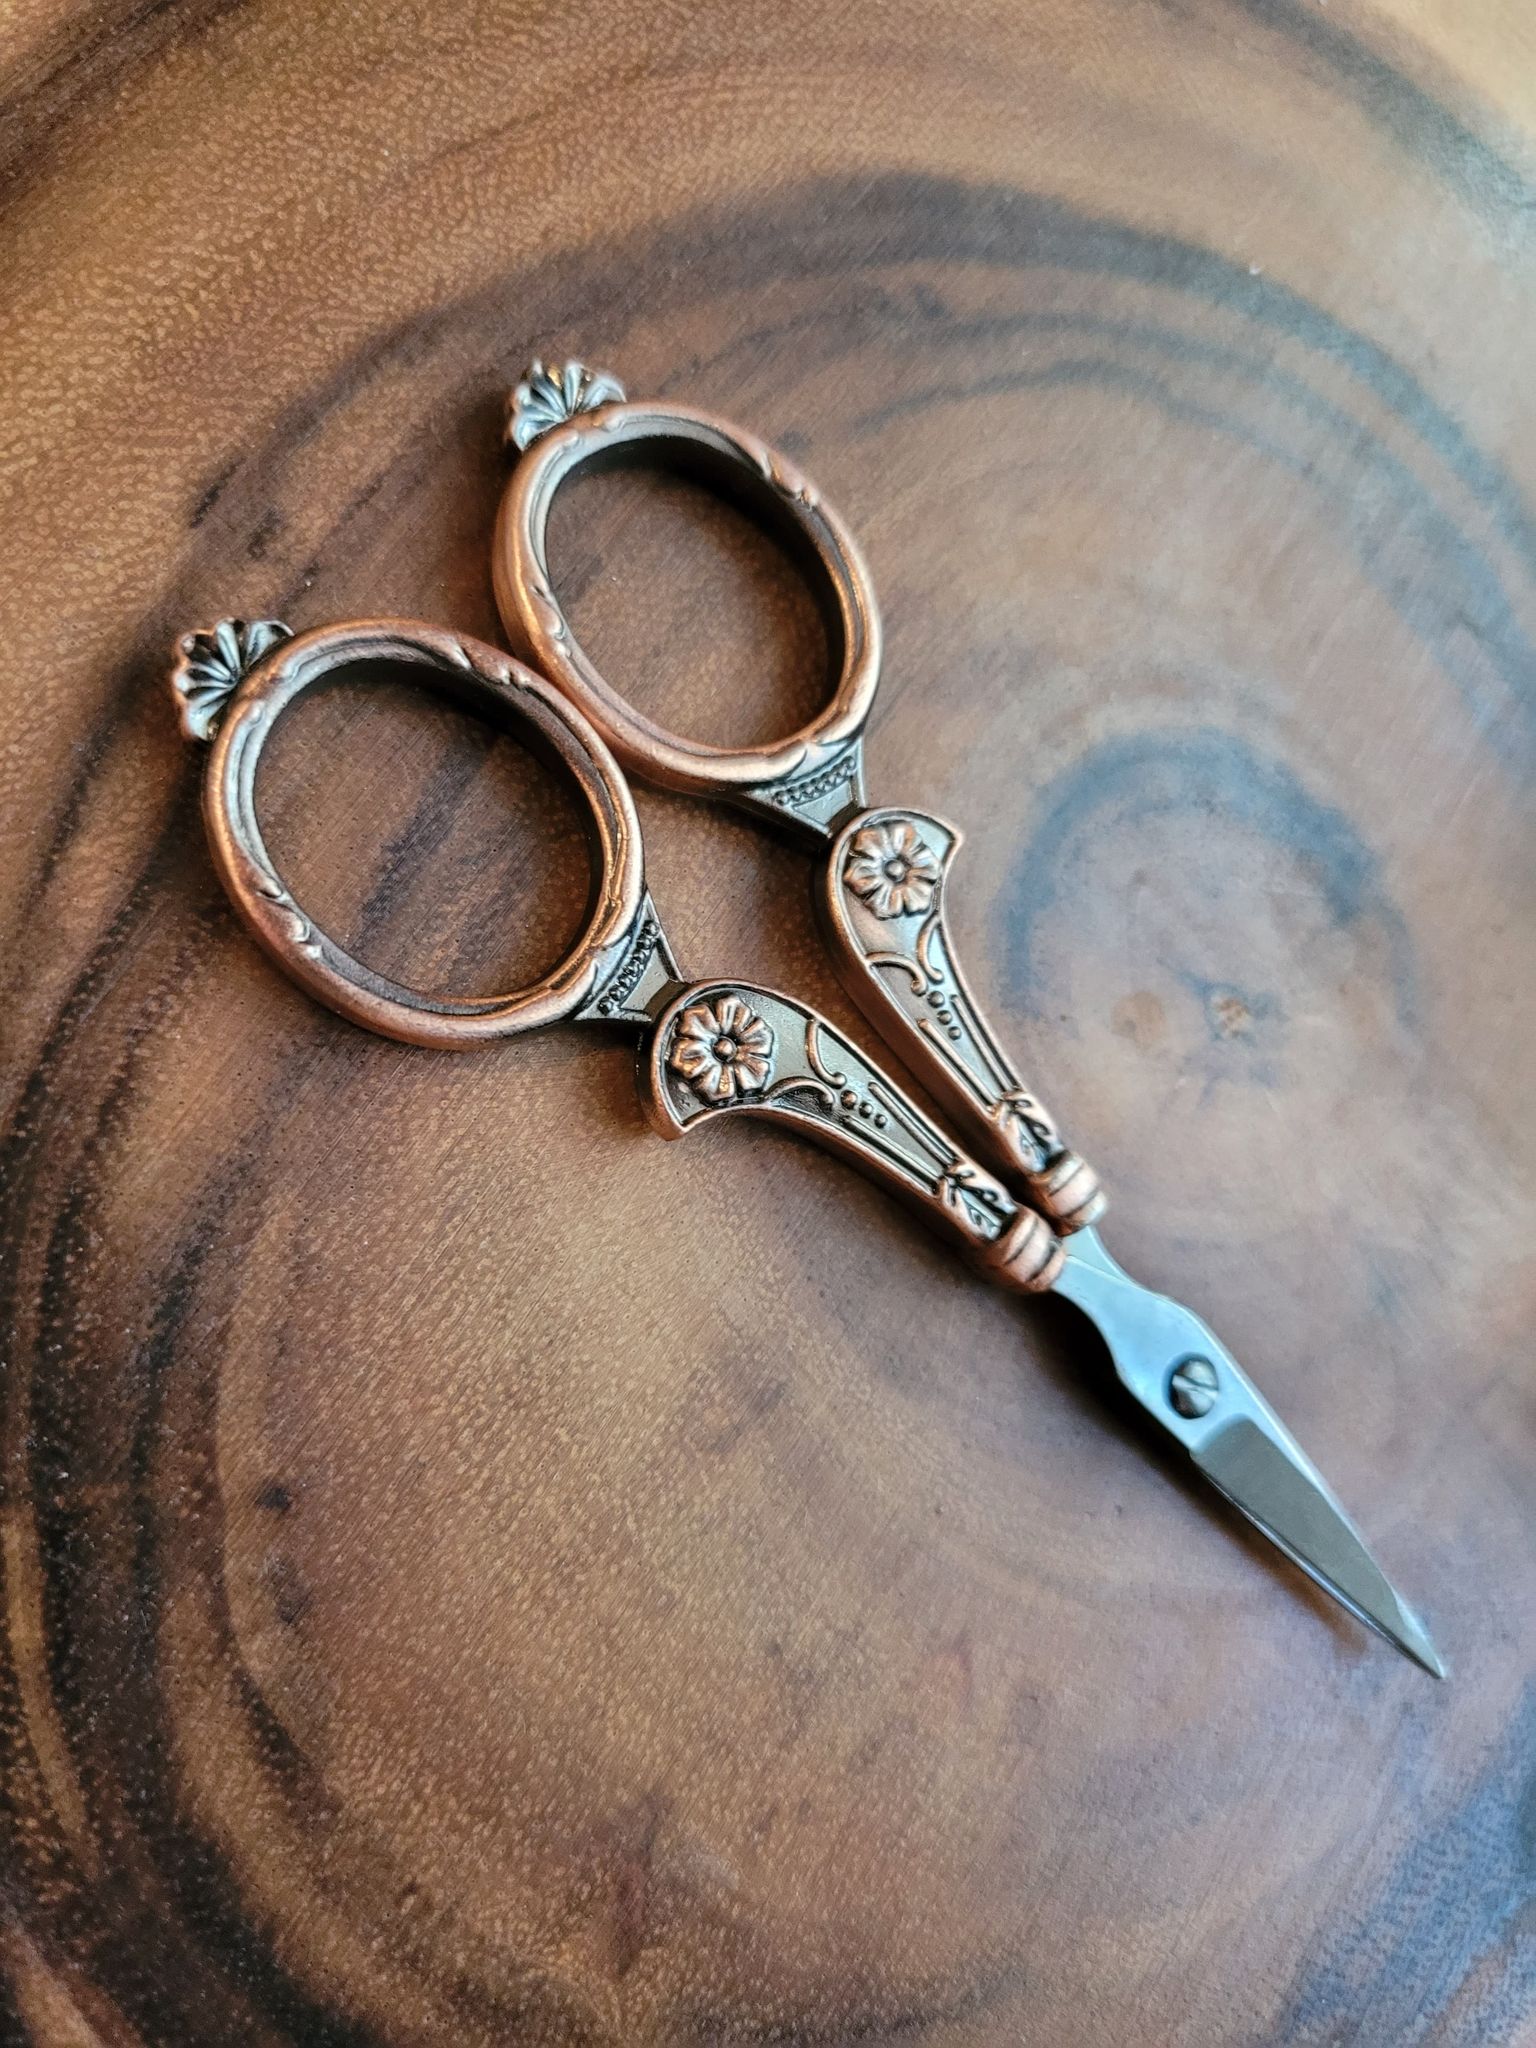 Vintage-Inspired Scissors – themoonmanual